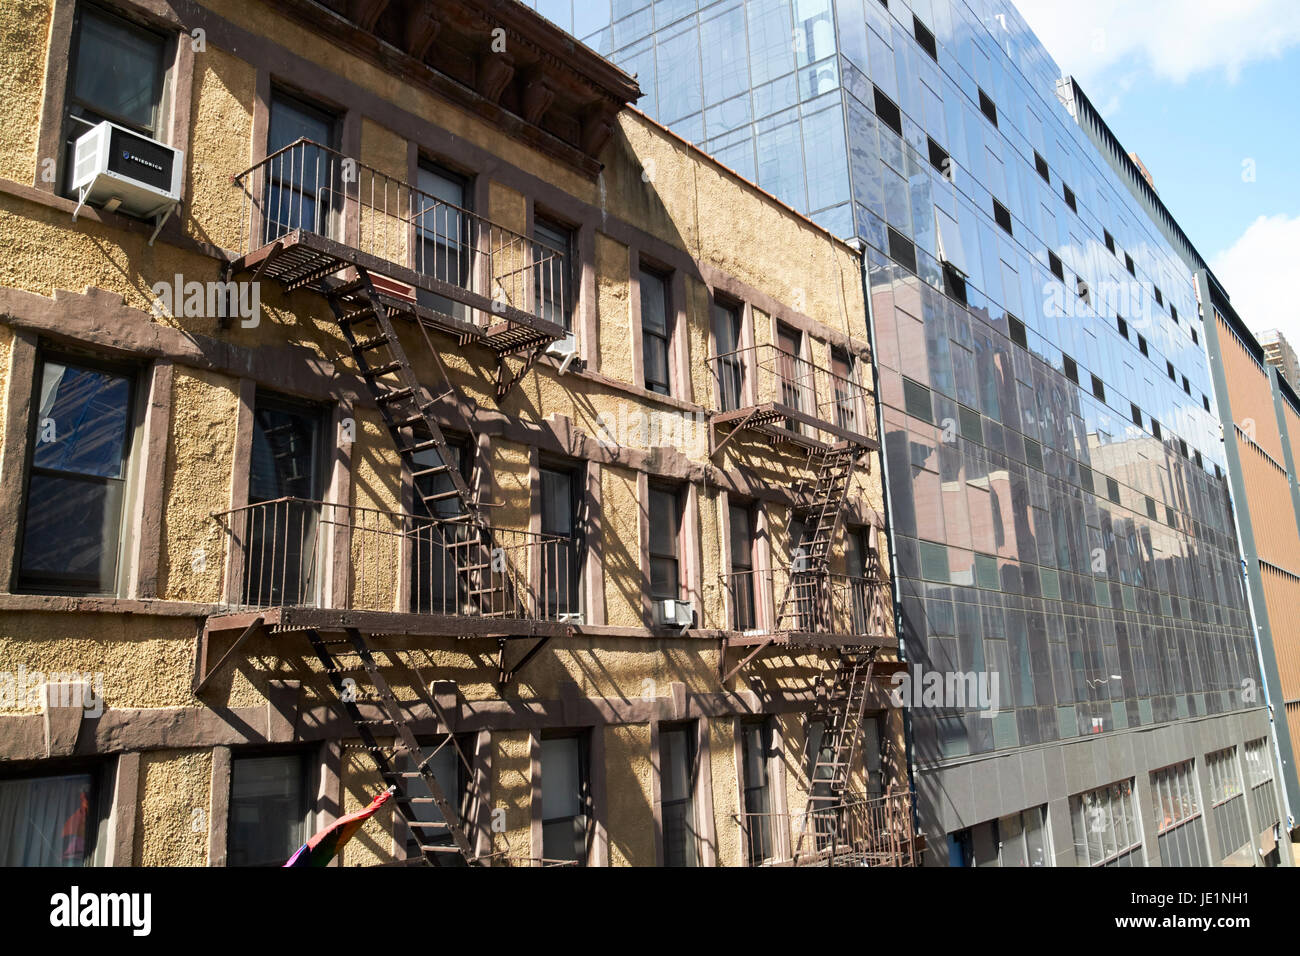 contrasting 19th century and 21st century residential architecture New York City USA Stock Photo